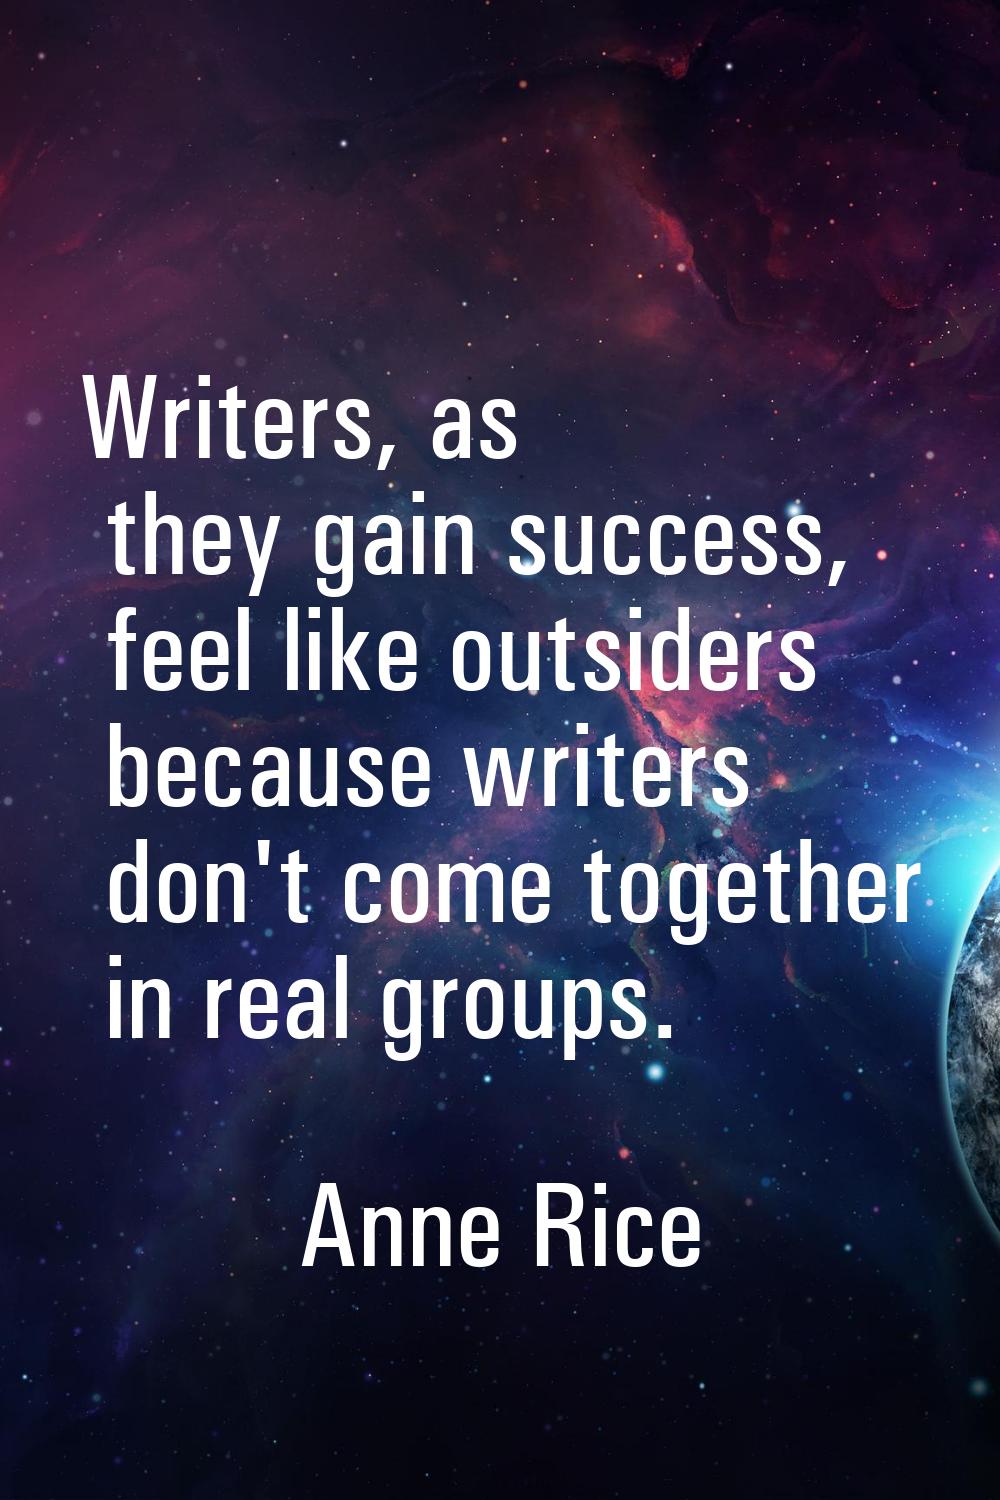 Writers, as they gain success, feel like outsiders because writers don't come together in real grou